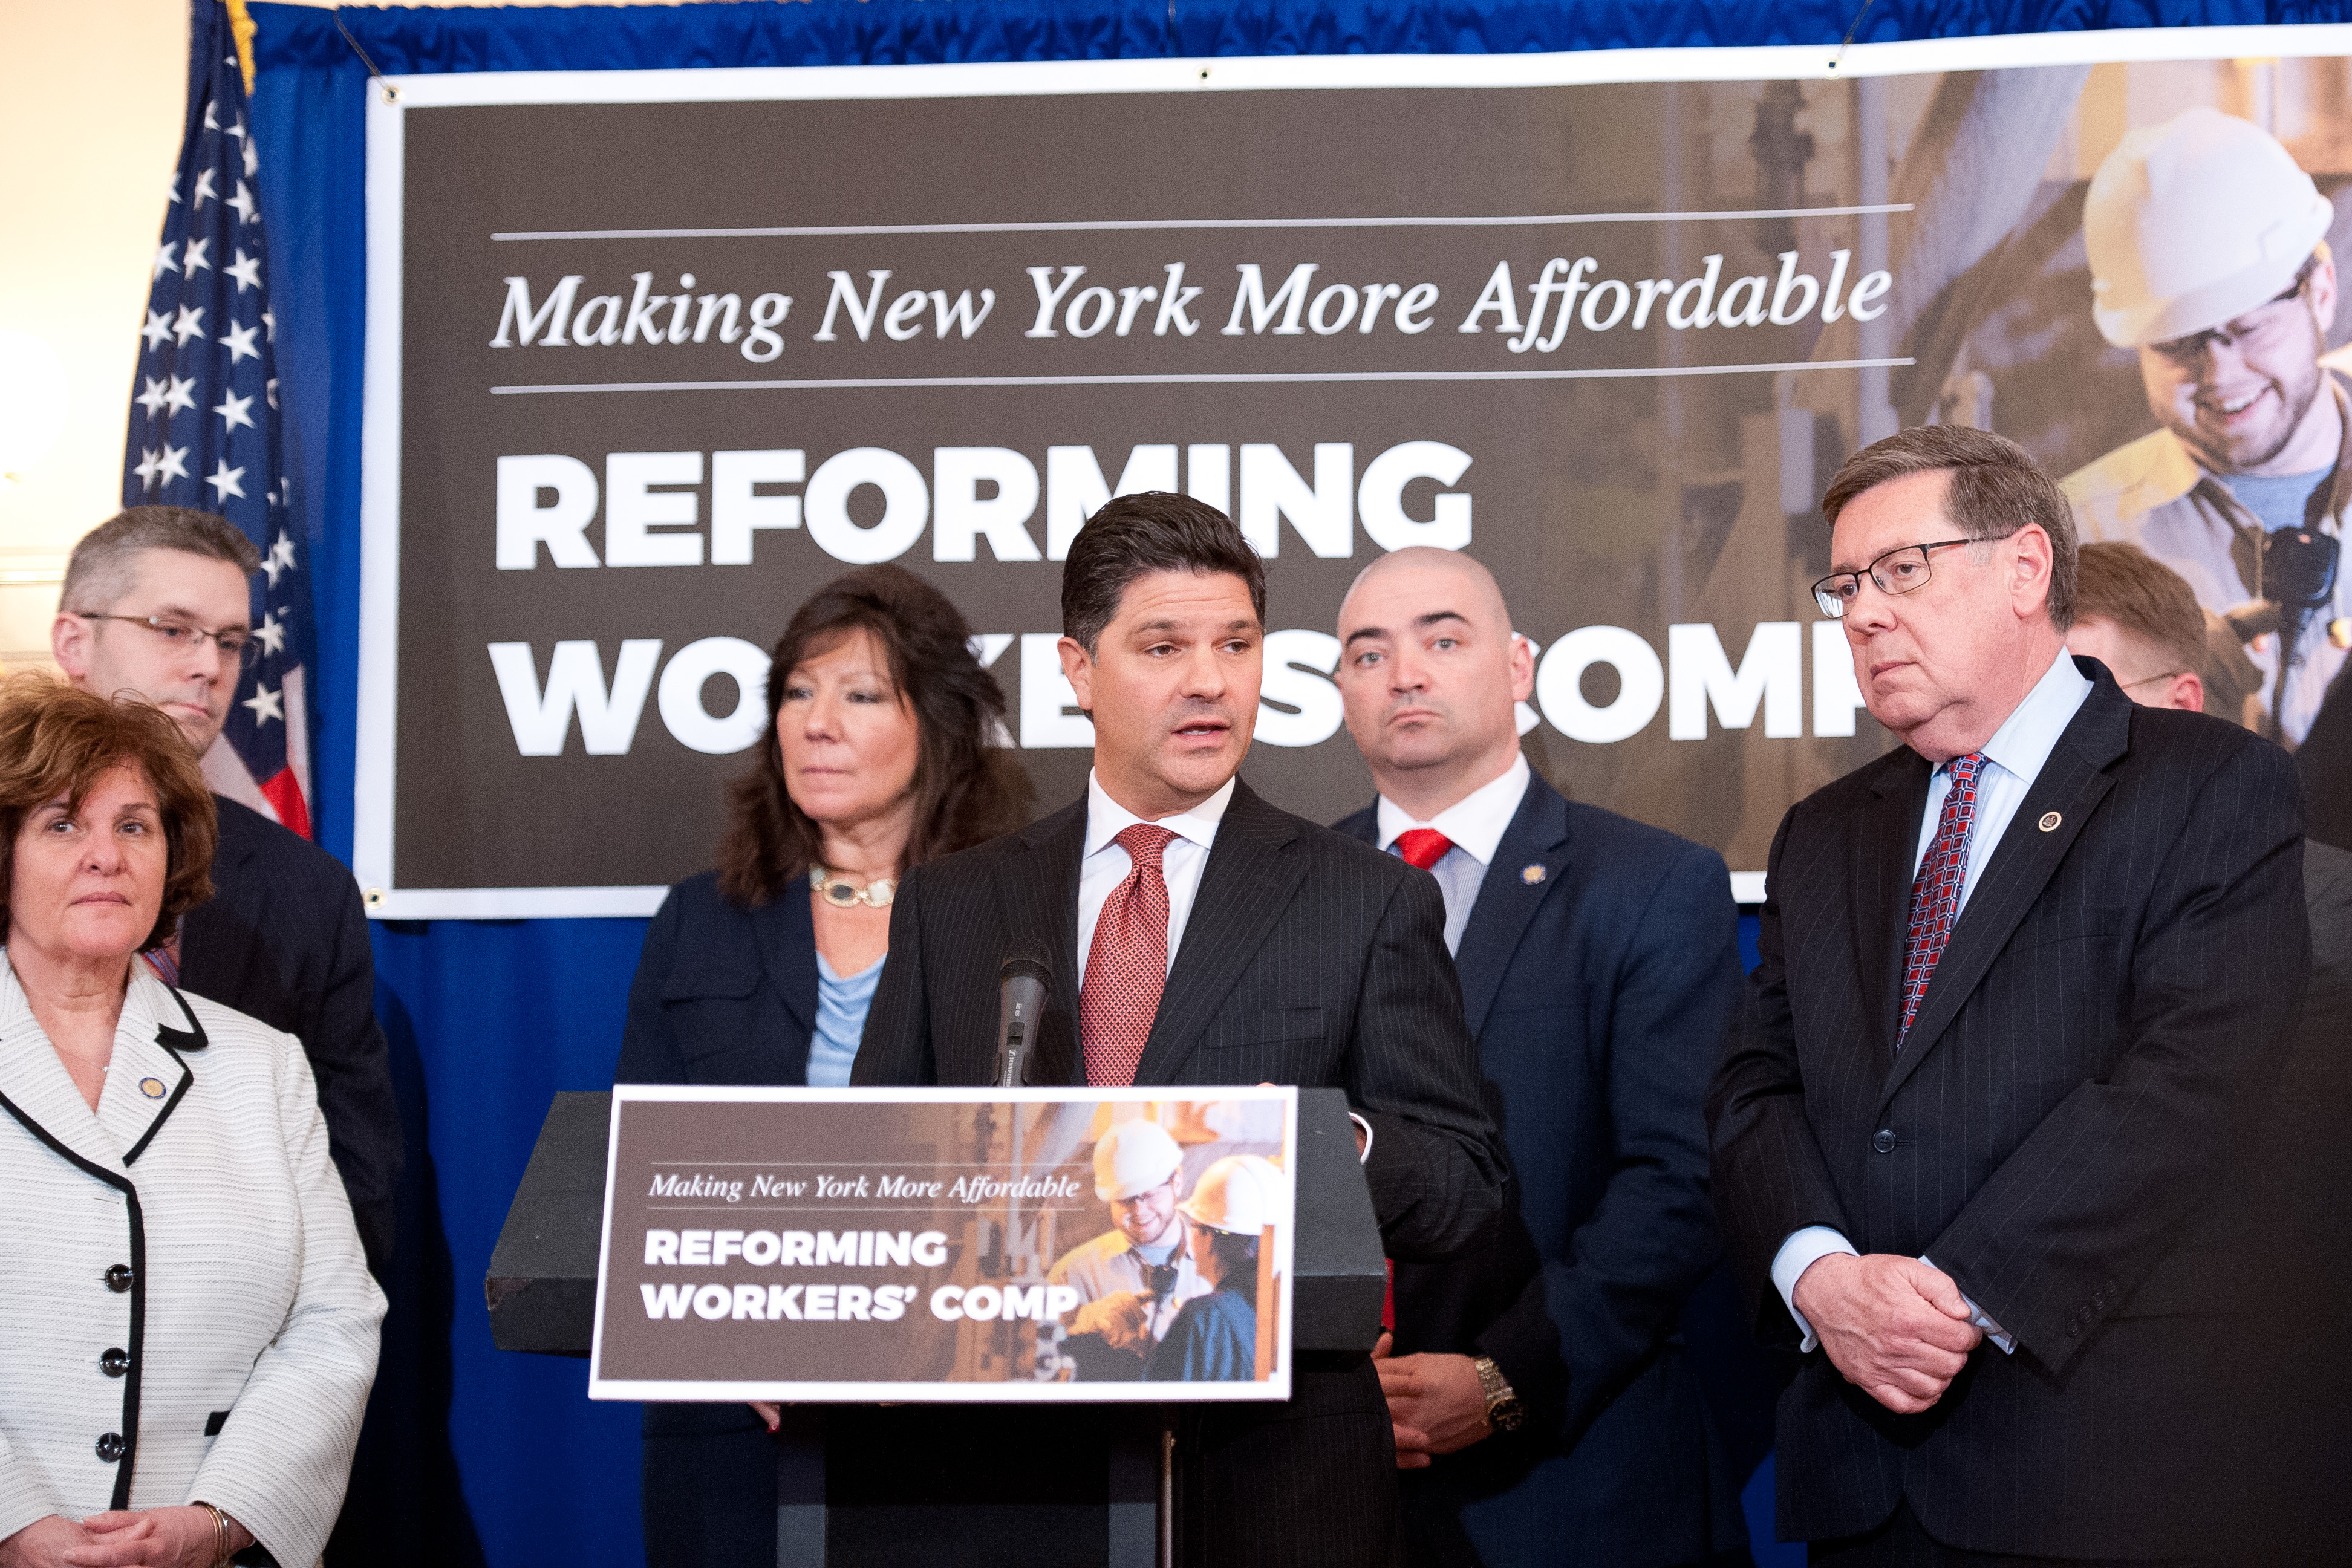 SENATORS CALL FOR SENSIBLE WORKERS’ COMP REFORM IN BUDGET NY State Senate